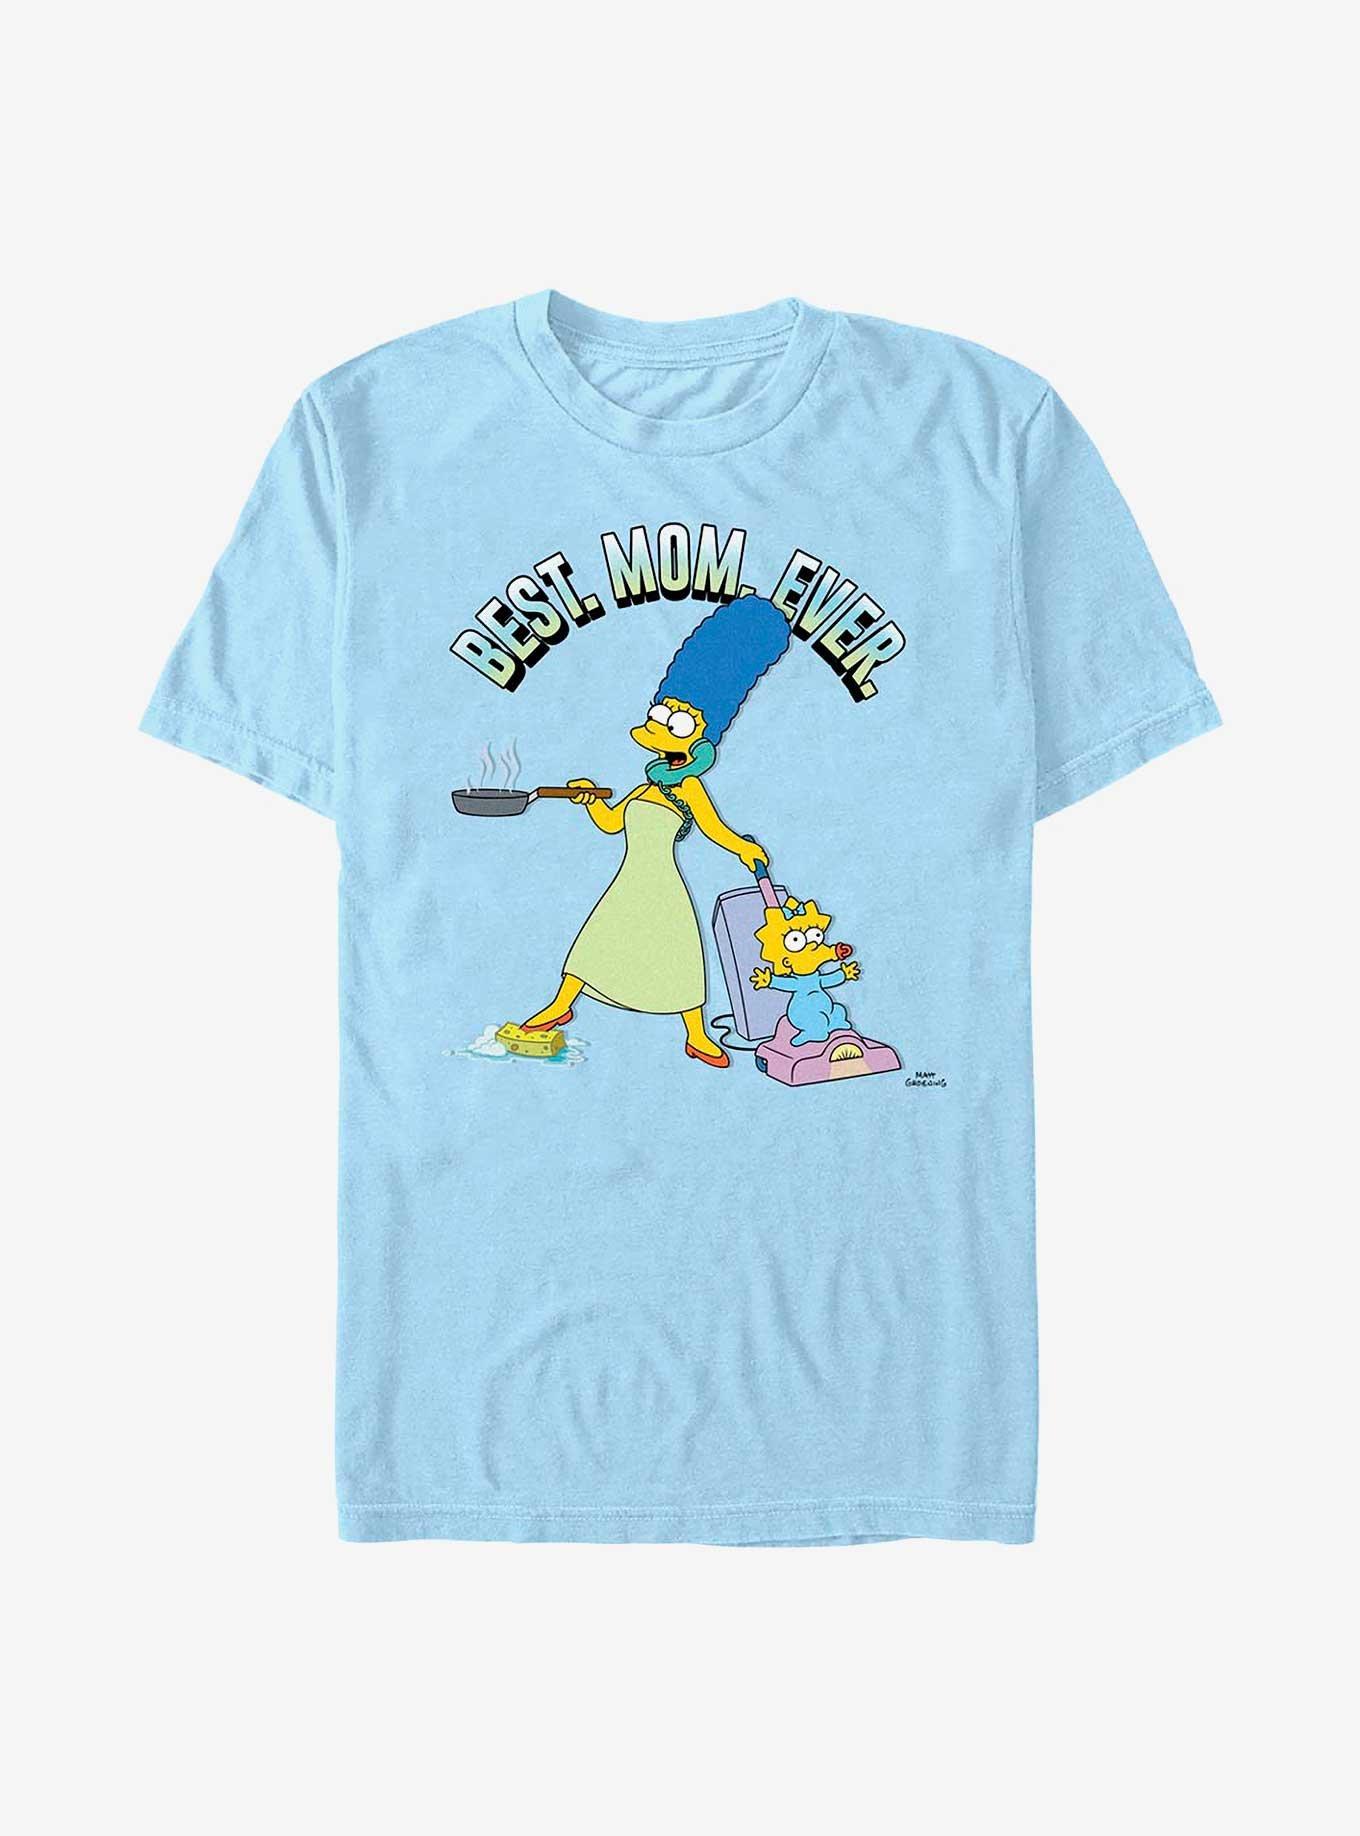 The Simpsons Mothers Can T-Shirt, LT BLUE, hi-res